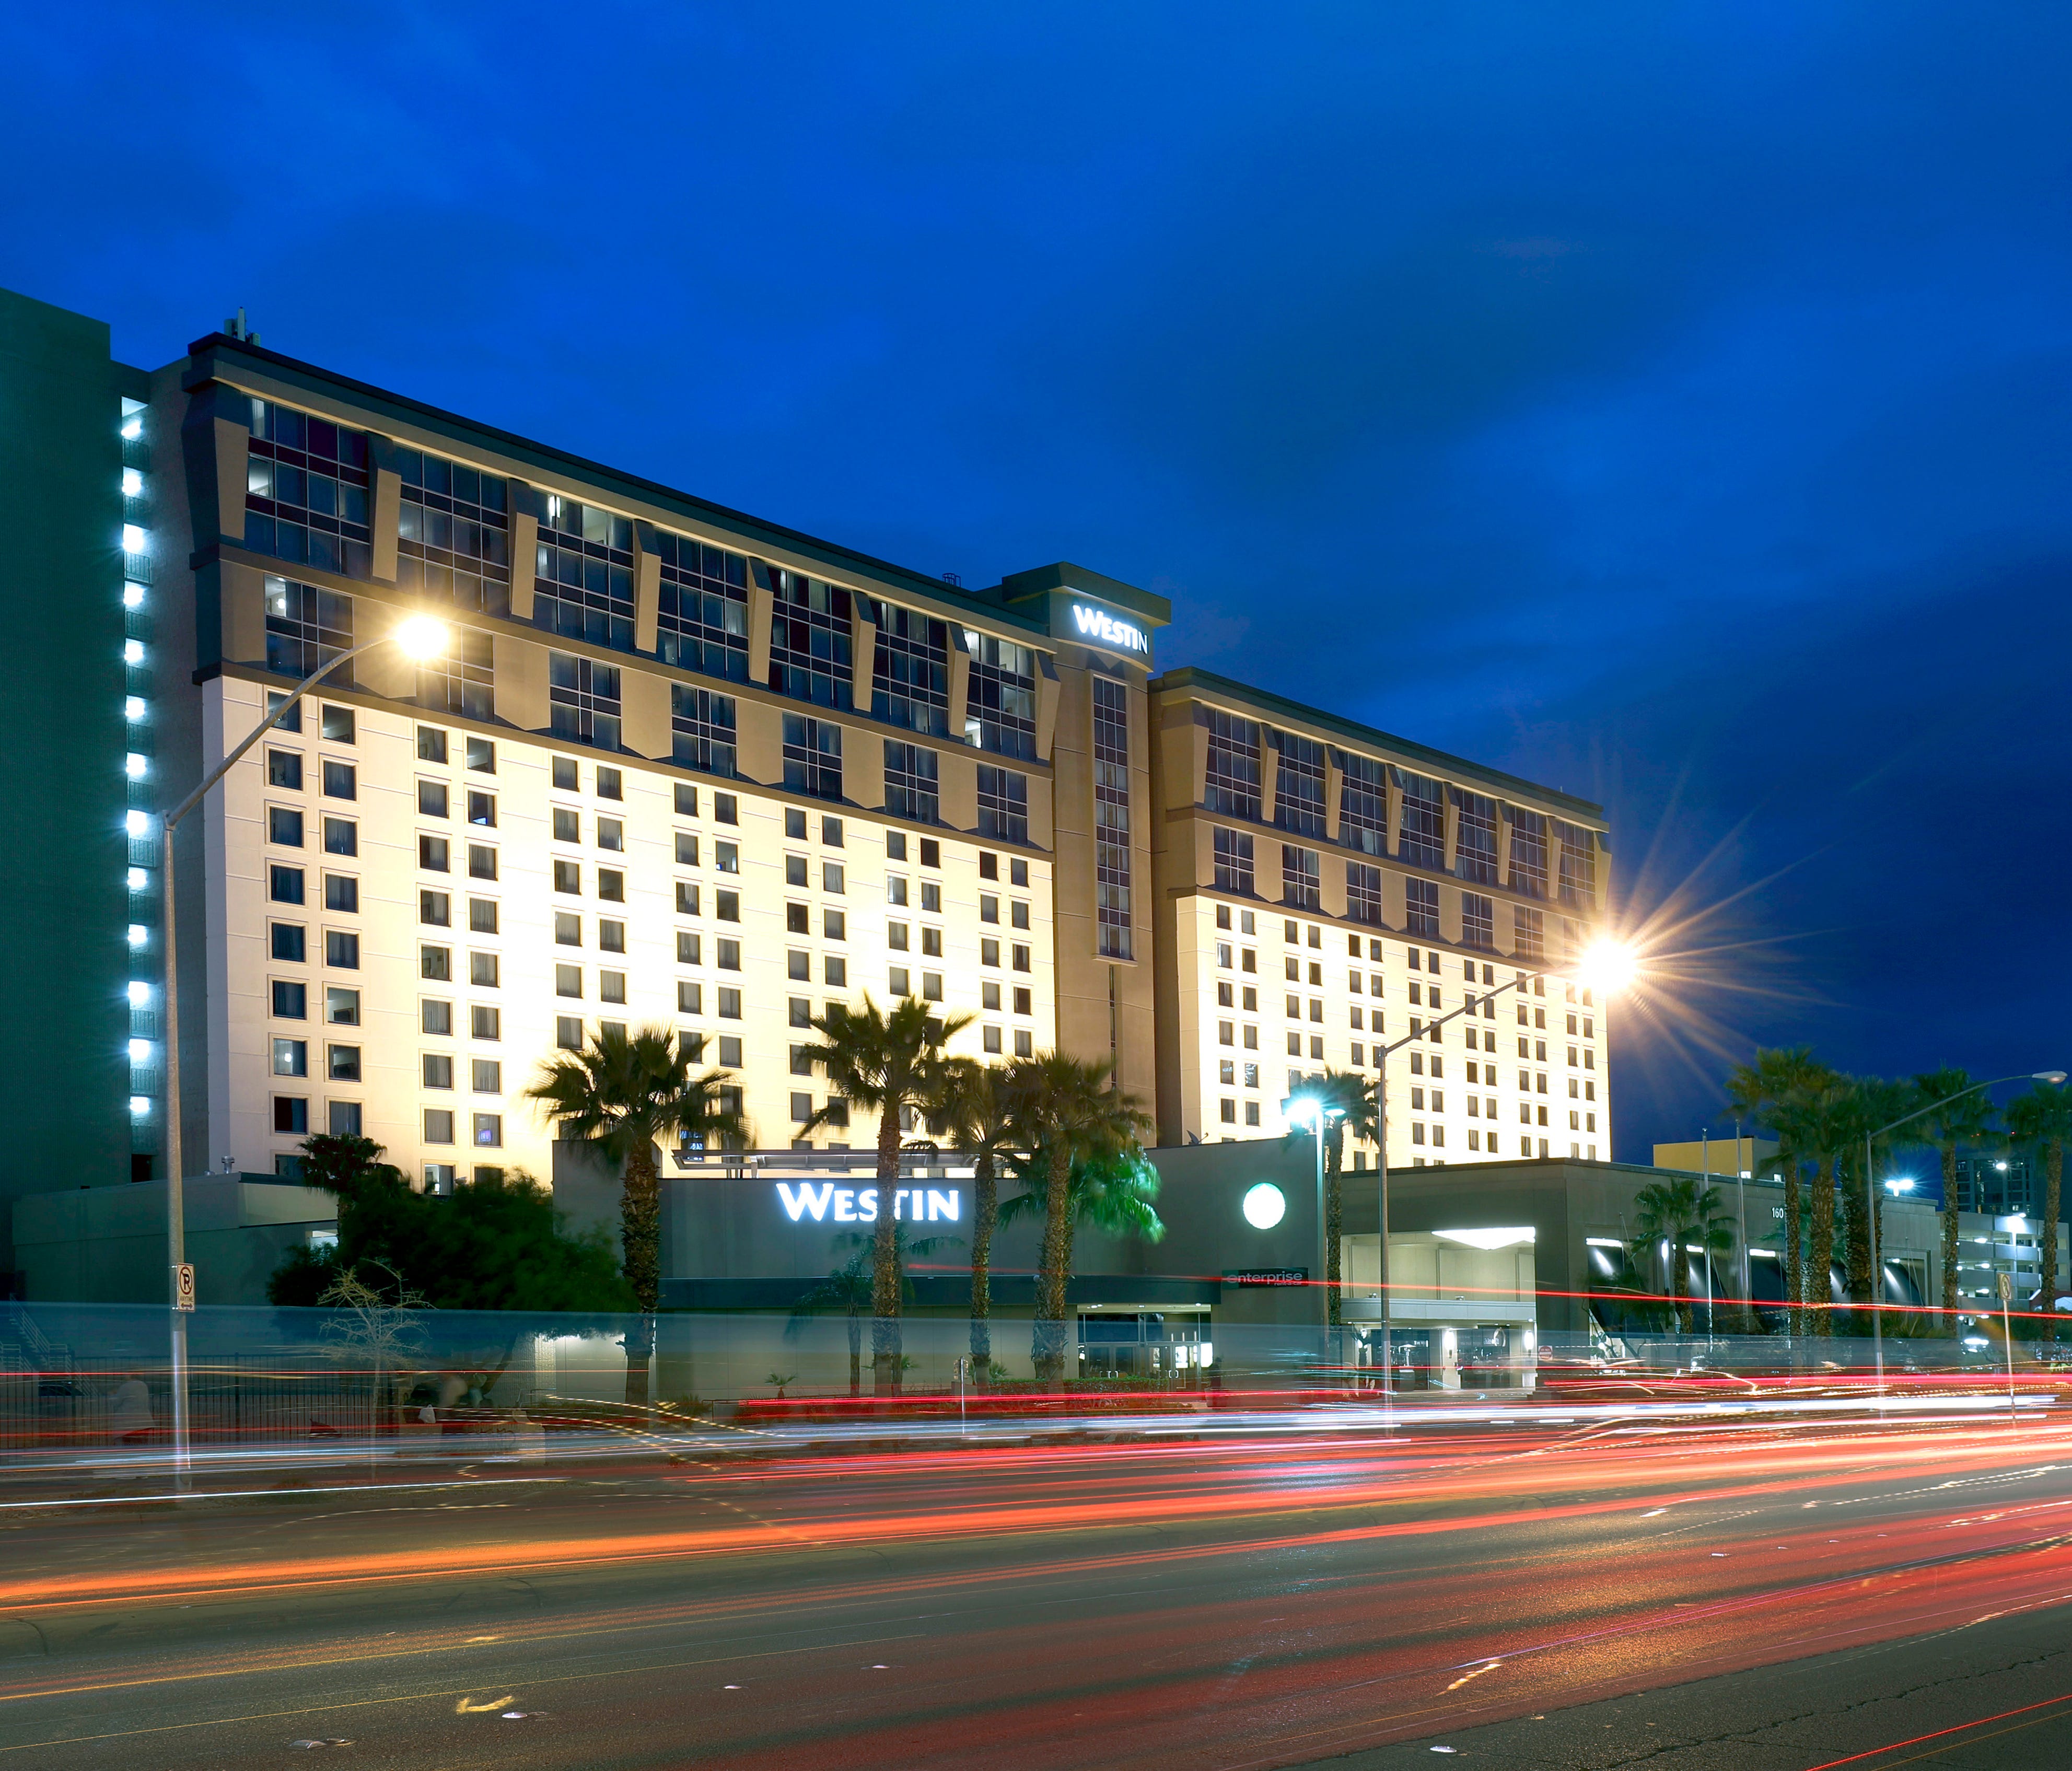 The Westin Las Vegas Hotel & Spa is just east of the center of the Strip, on Flamingo Road.